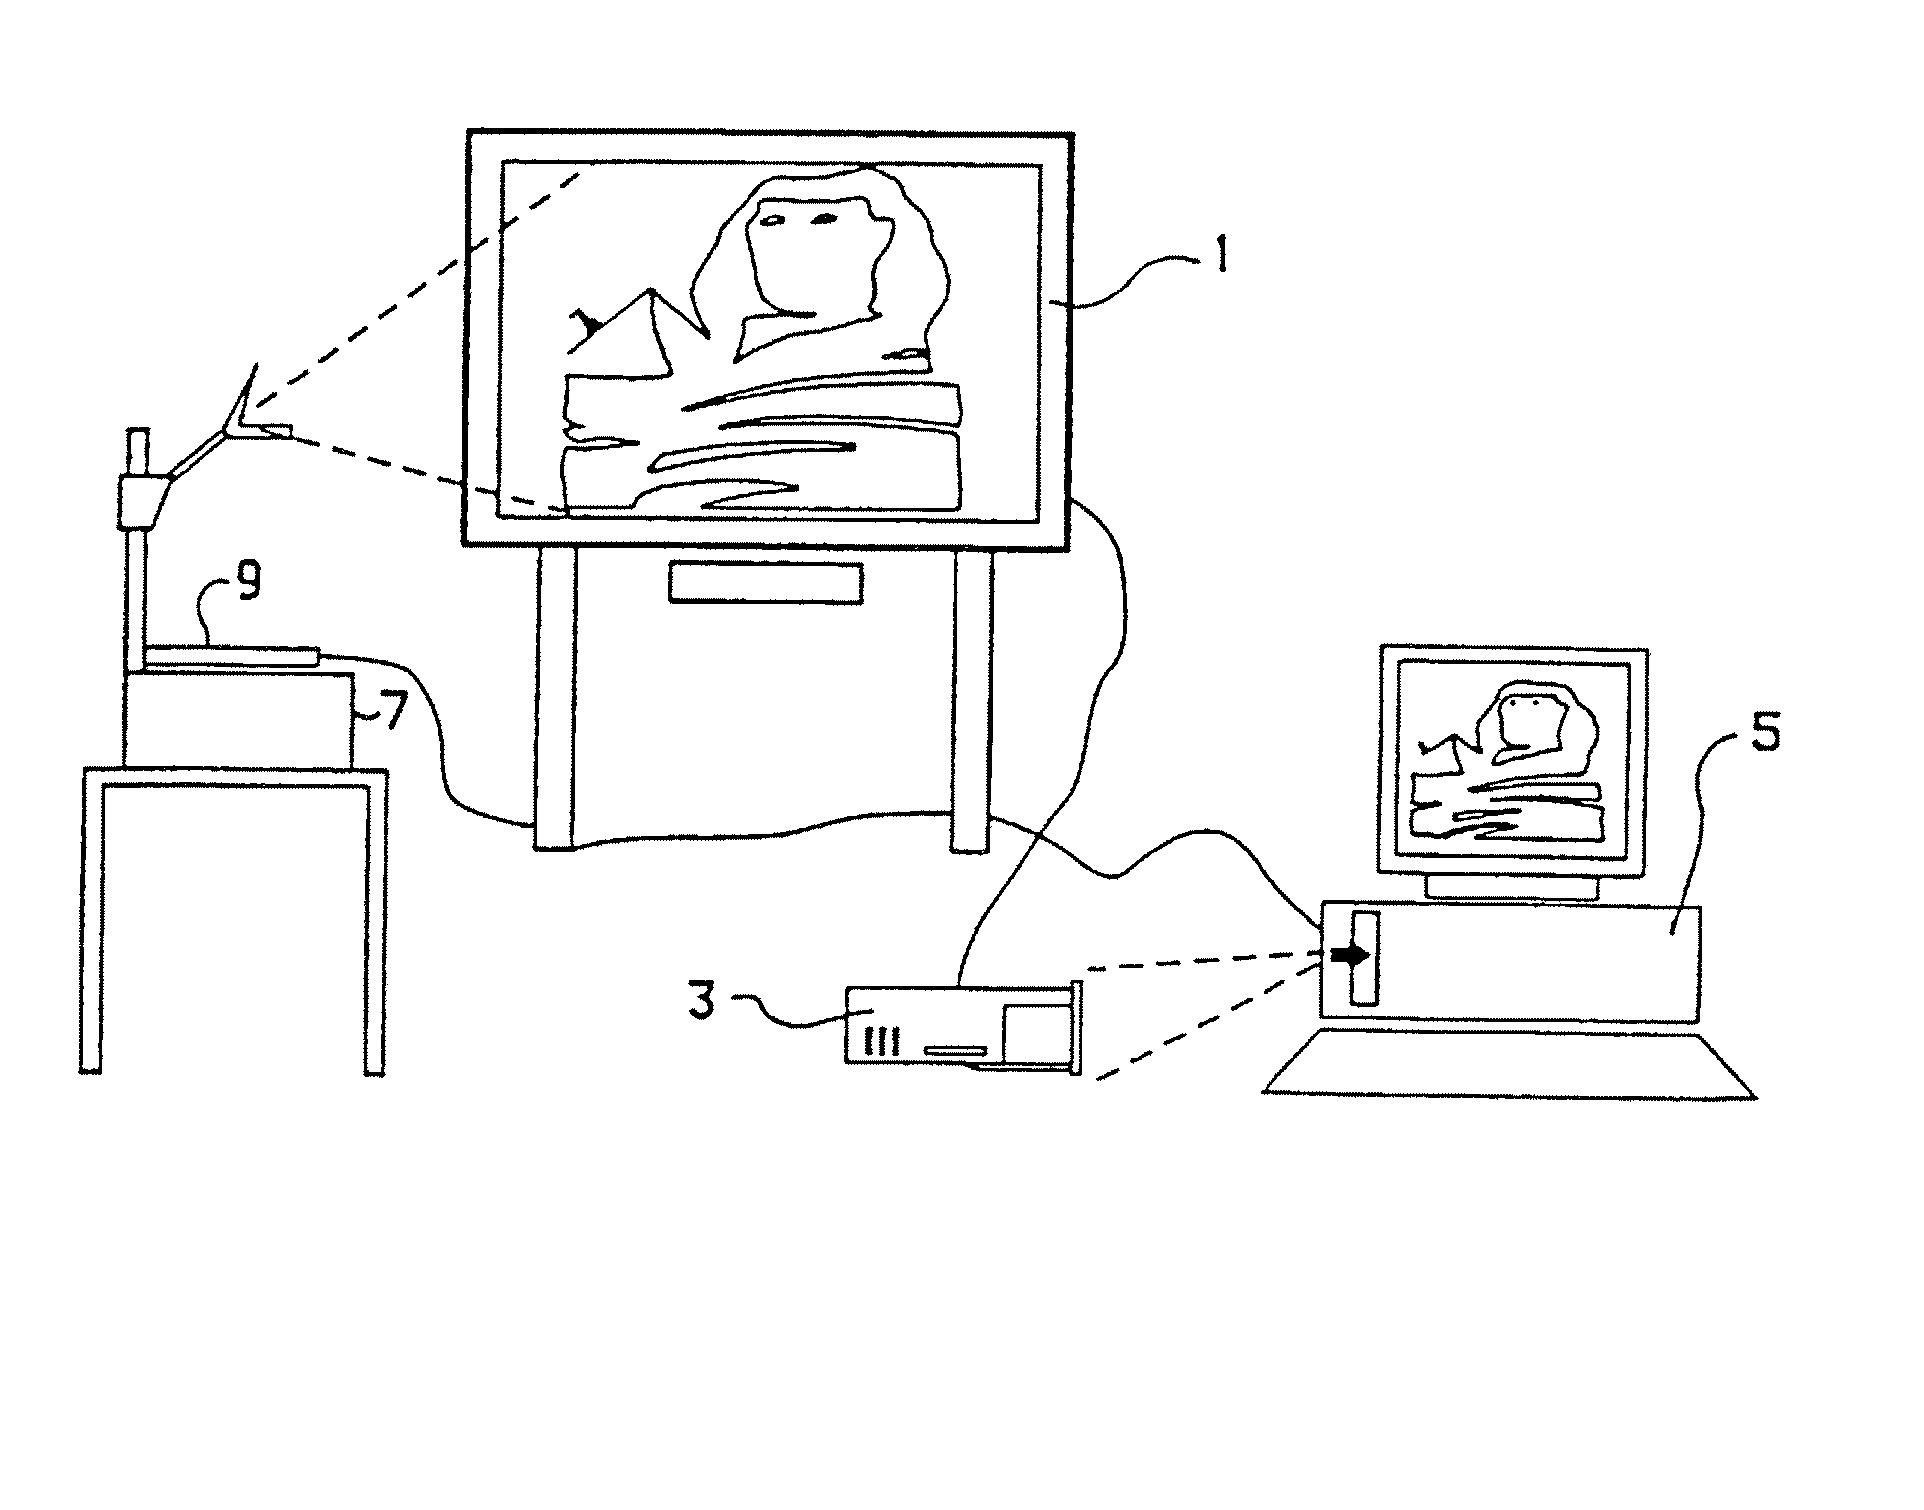 Projection display system with pressure sensing at a screen, a calibration system corrects for non-orthogonal projection errors